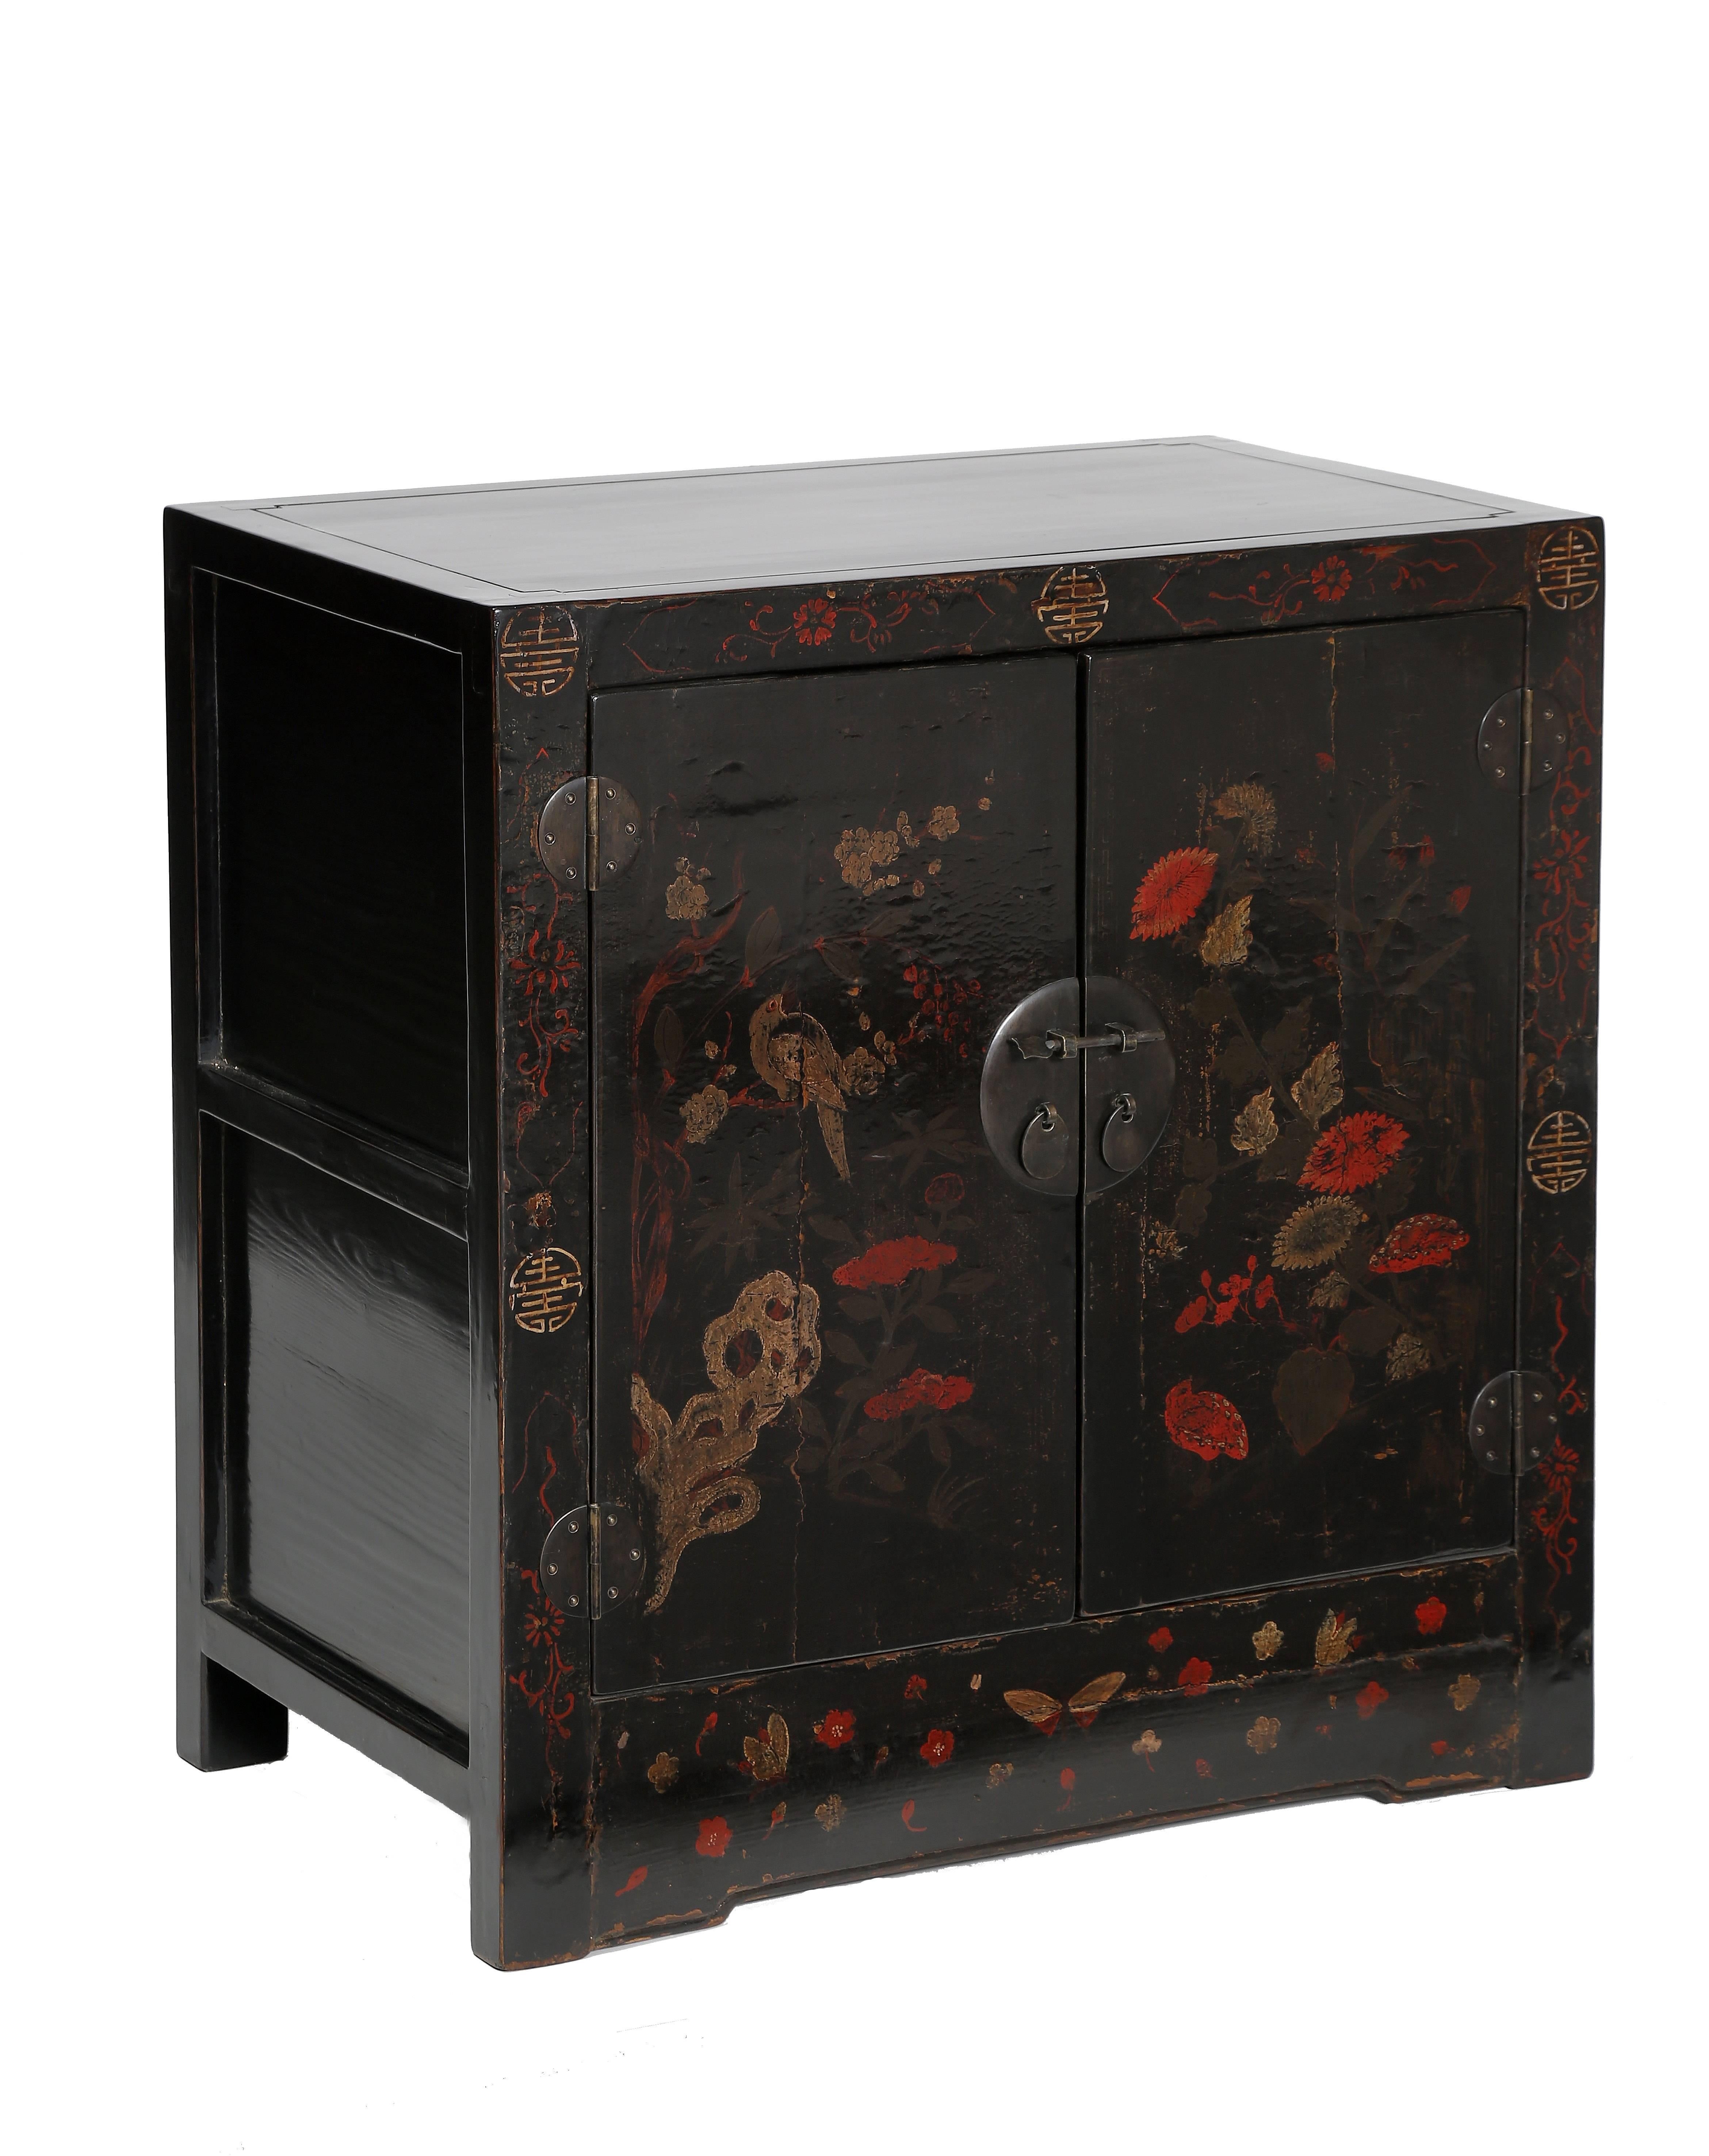 Qing Antique Chinoiserie Pr Painted Lacquer Cabinets /Chests Seasons Floral Paintings